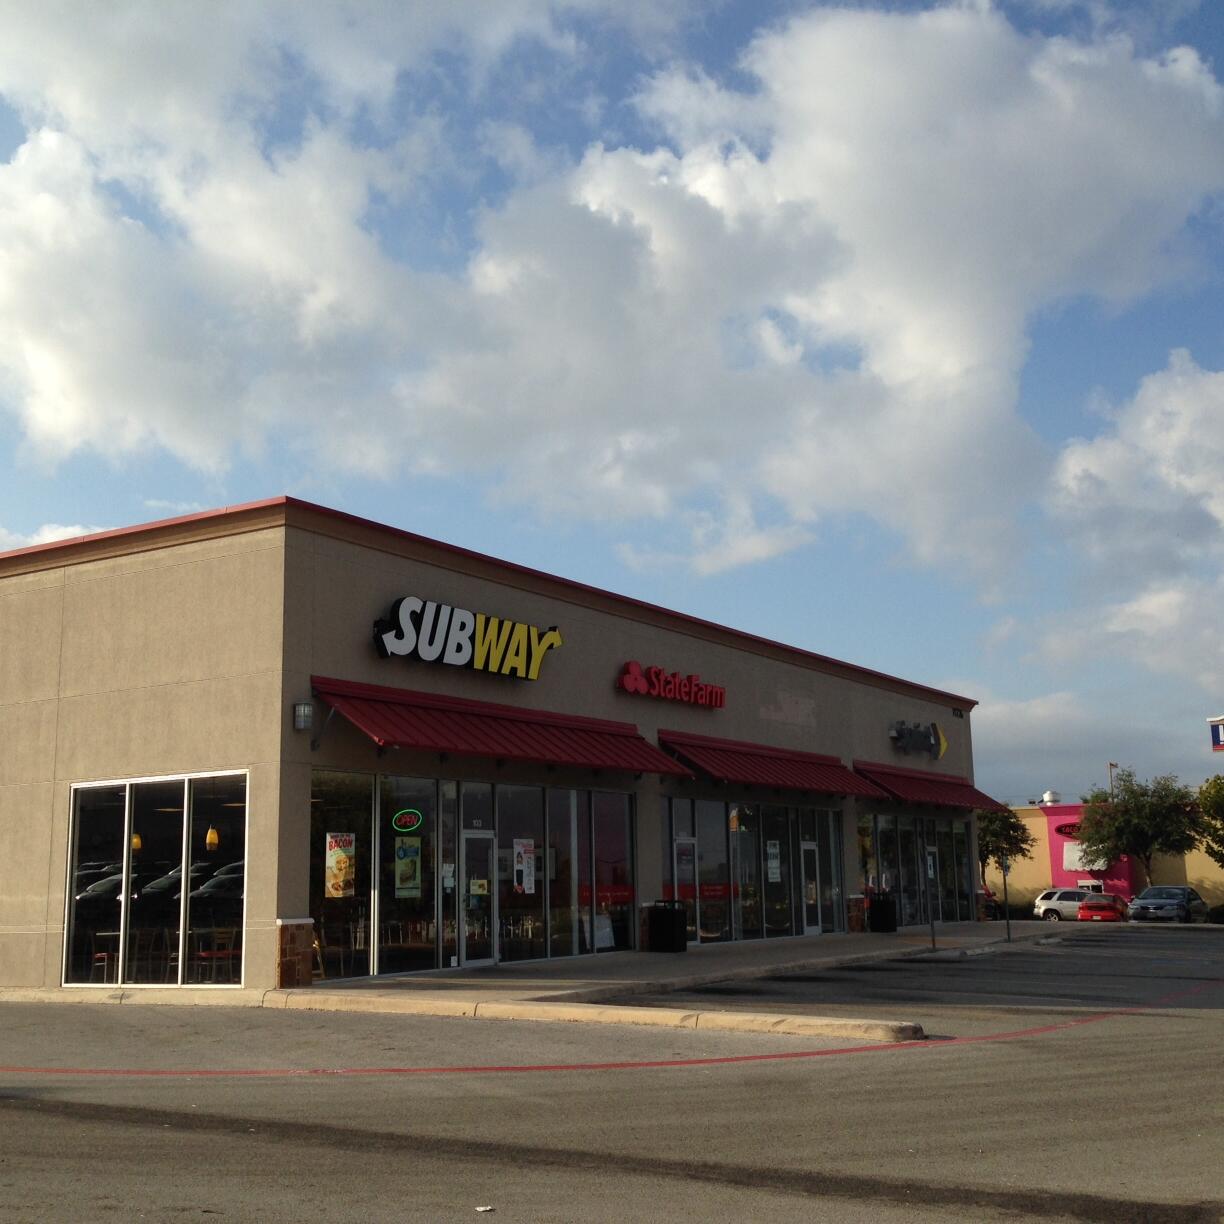 Retail Plaza investment property sold in San Antonio